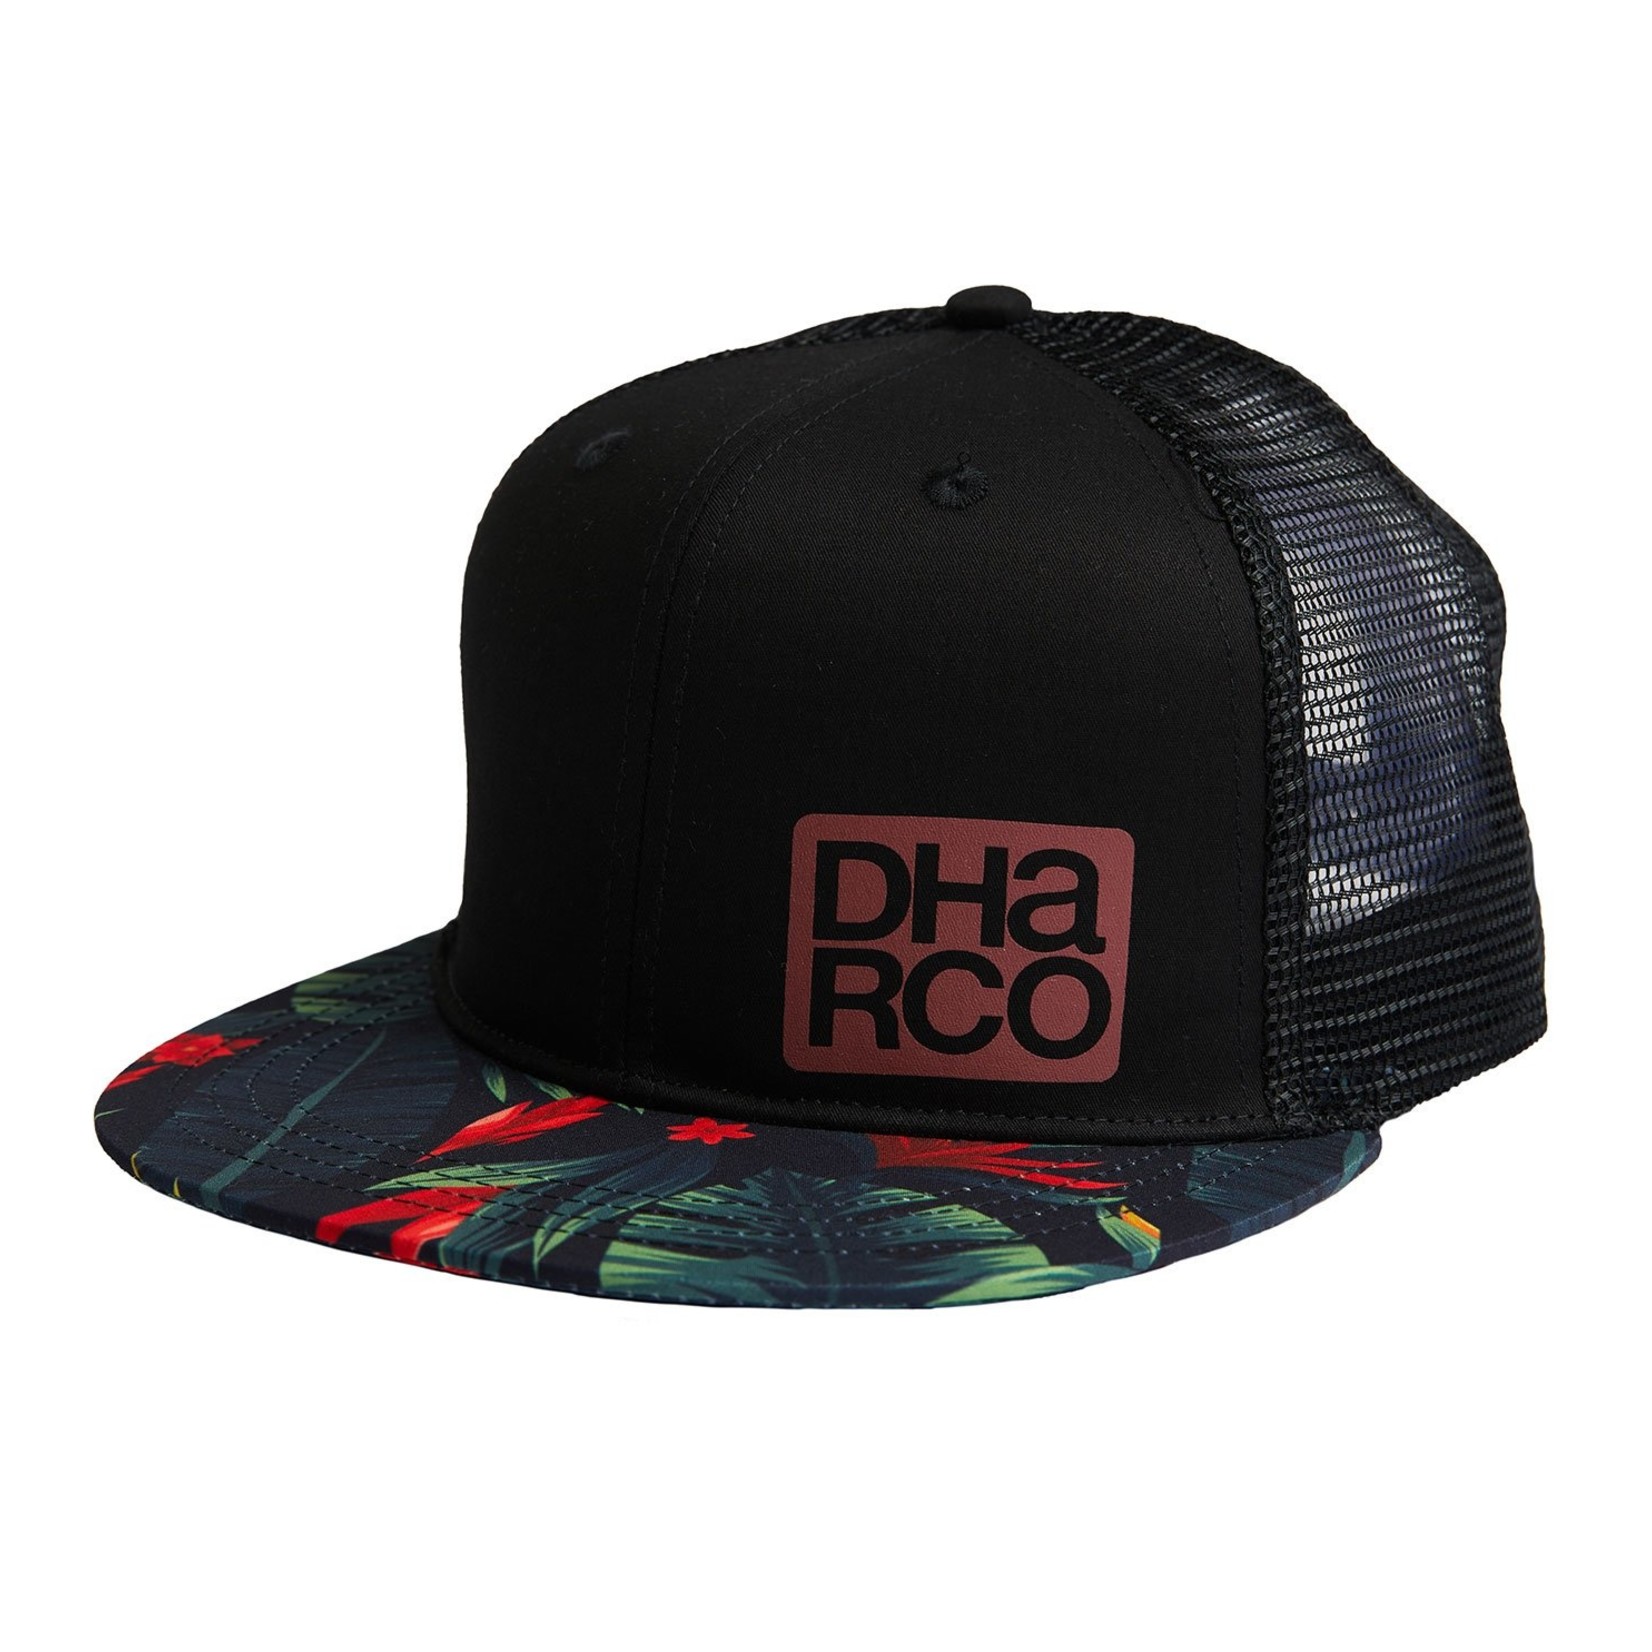 DHARCO DHARCO FLAT BRIM TRUCKER CONNOR